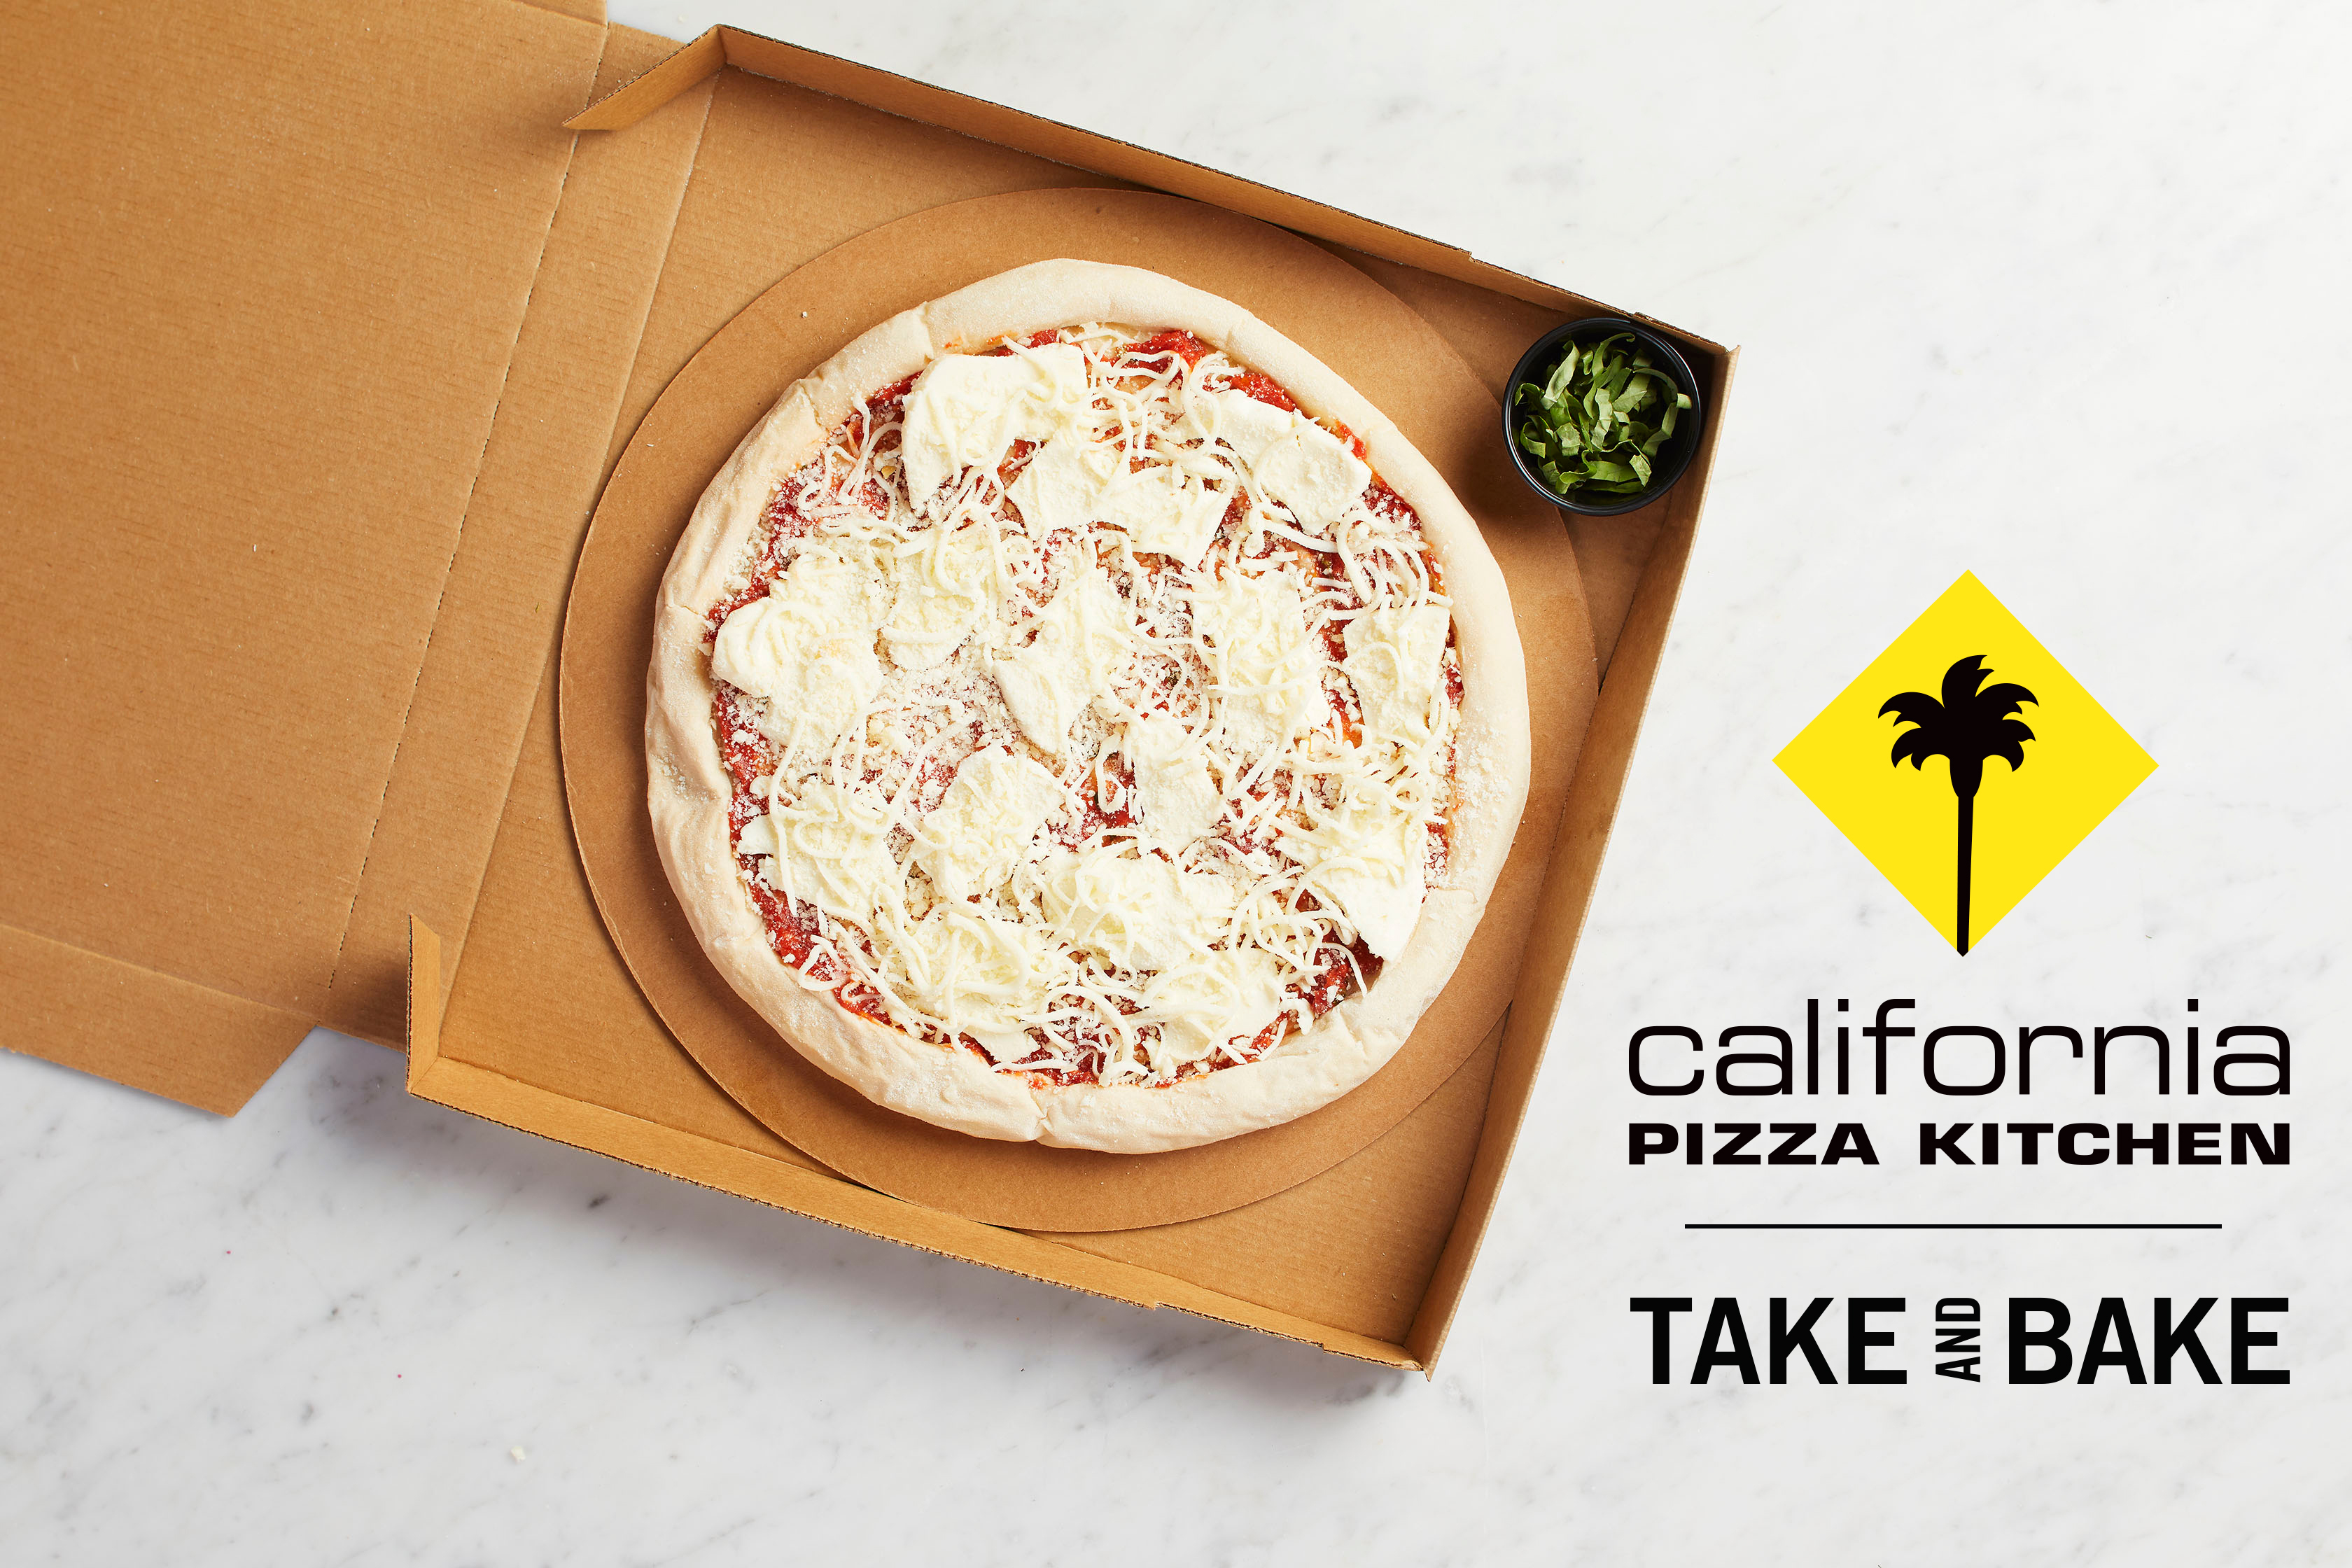 California Pizza Kitchen Kicks Off National Pizza Month By Giving Away Up To 10